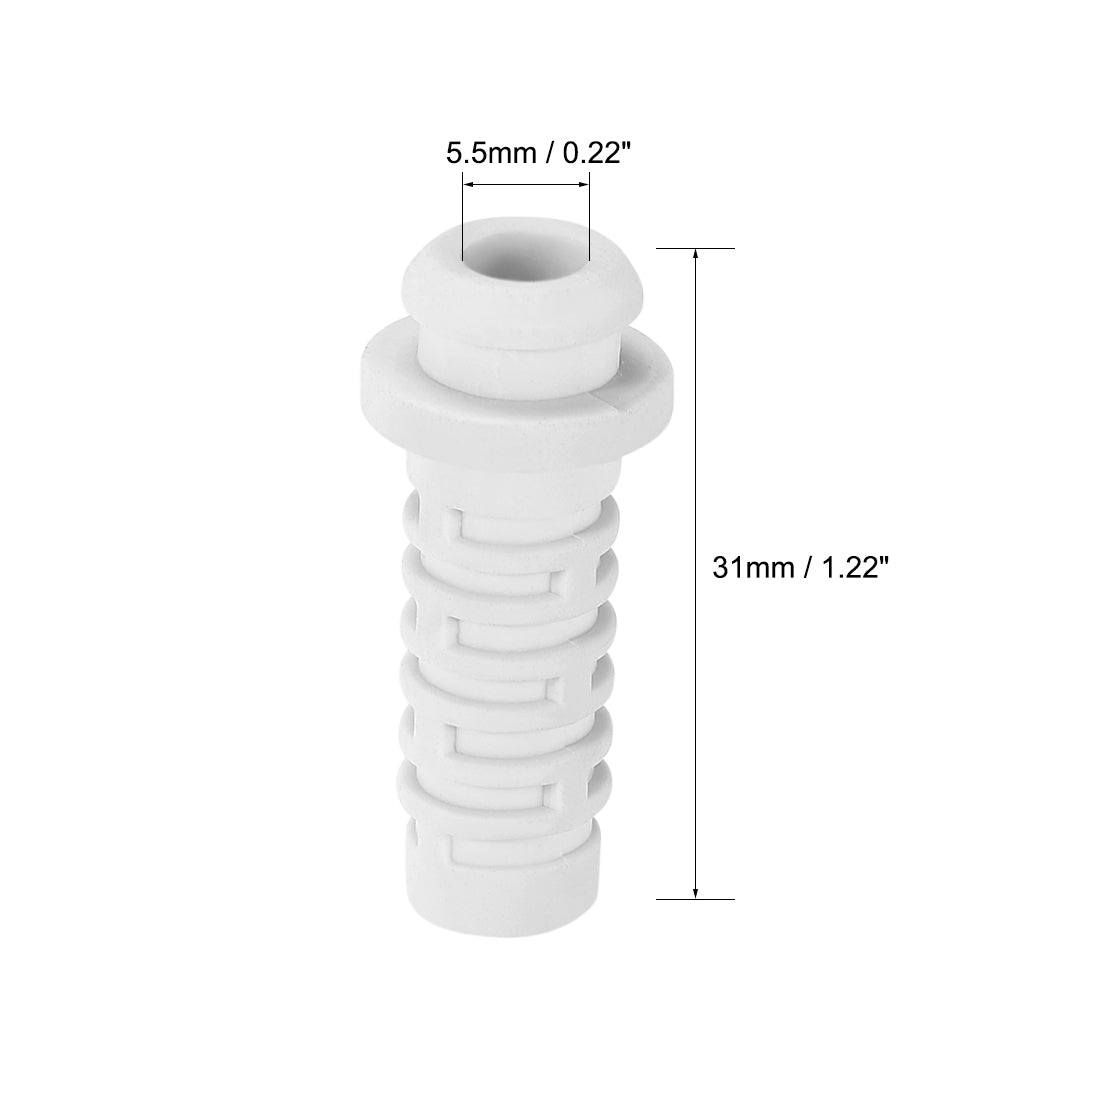 uxcell Uxcell Strain Relief Boots 31mm PVC Cord Protector Cover Sleeve for 4 AWG Electrical Cables White 15Pcs